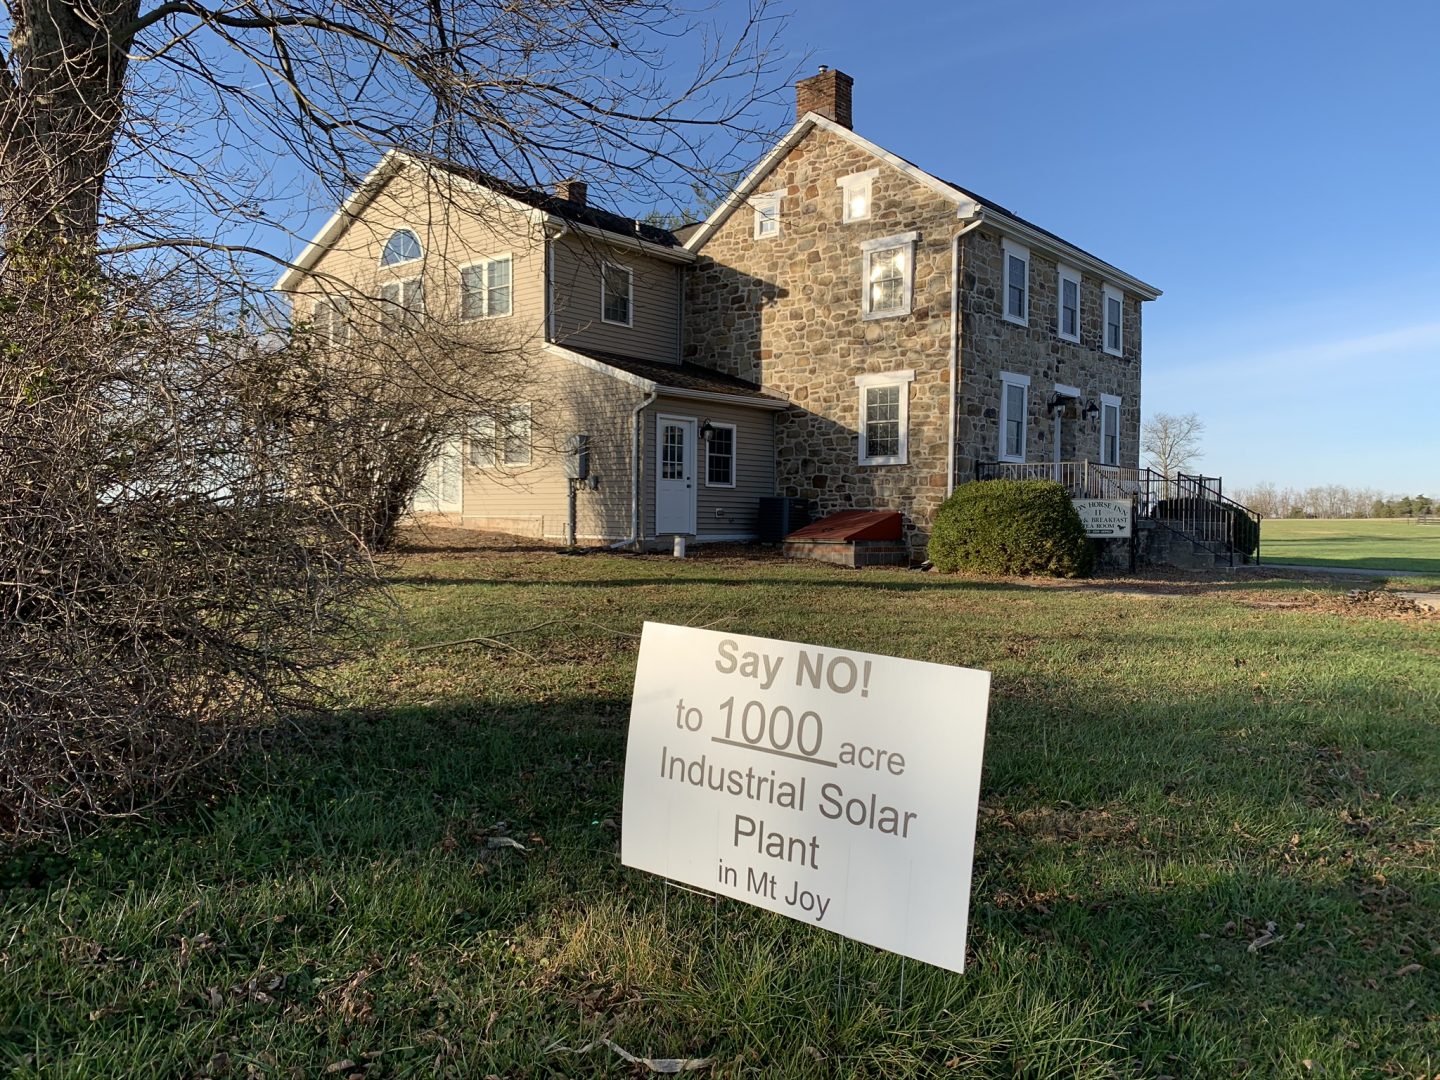 One of the many signs protesting a proposed solar project in Mount Joy Township, Adams County is seen here in front of the Iron Horse Inn on Nov. 24, 2020. Owner Tom Newhart said the project could hurt the tourism industry in the area, just outside Gettysburg. 